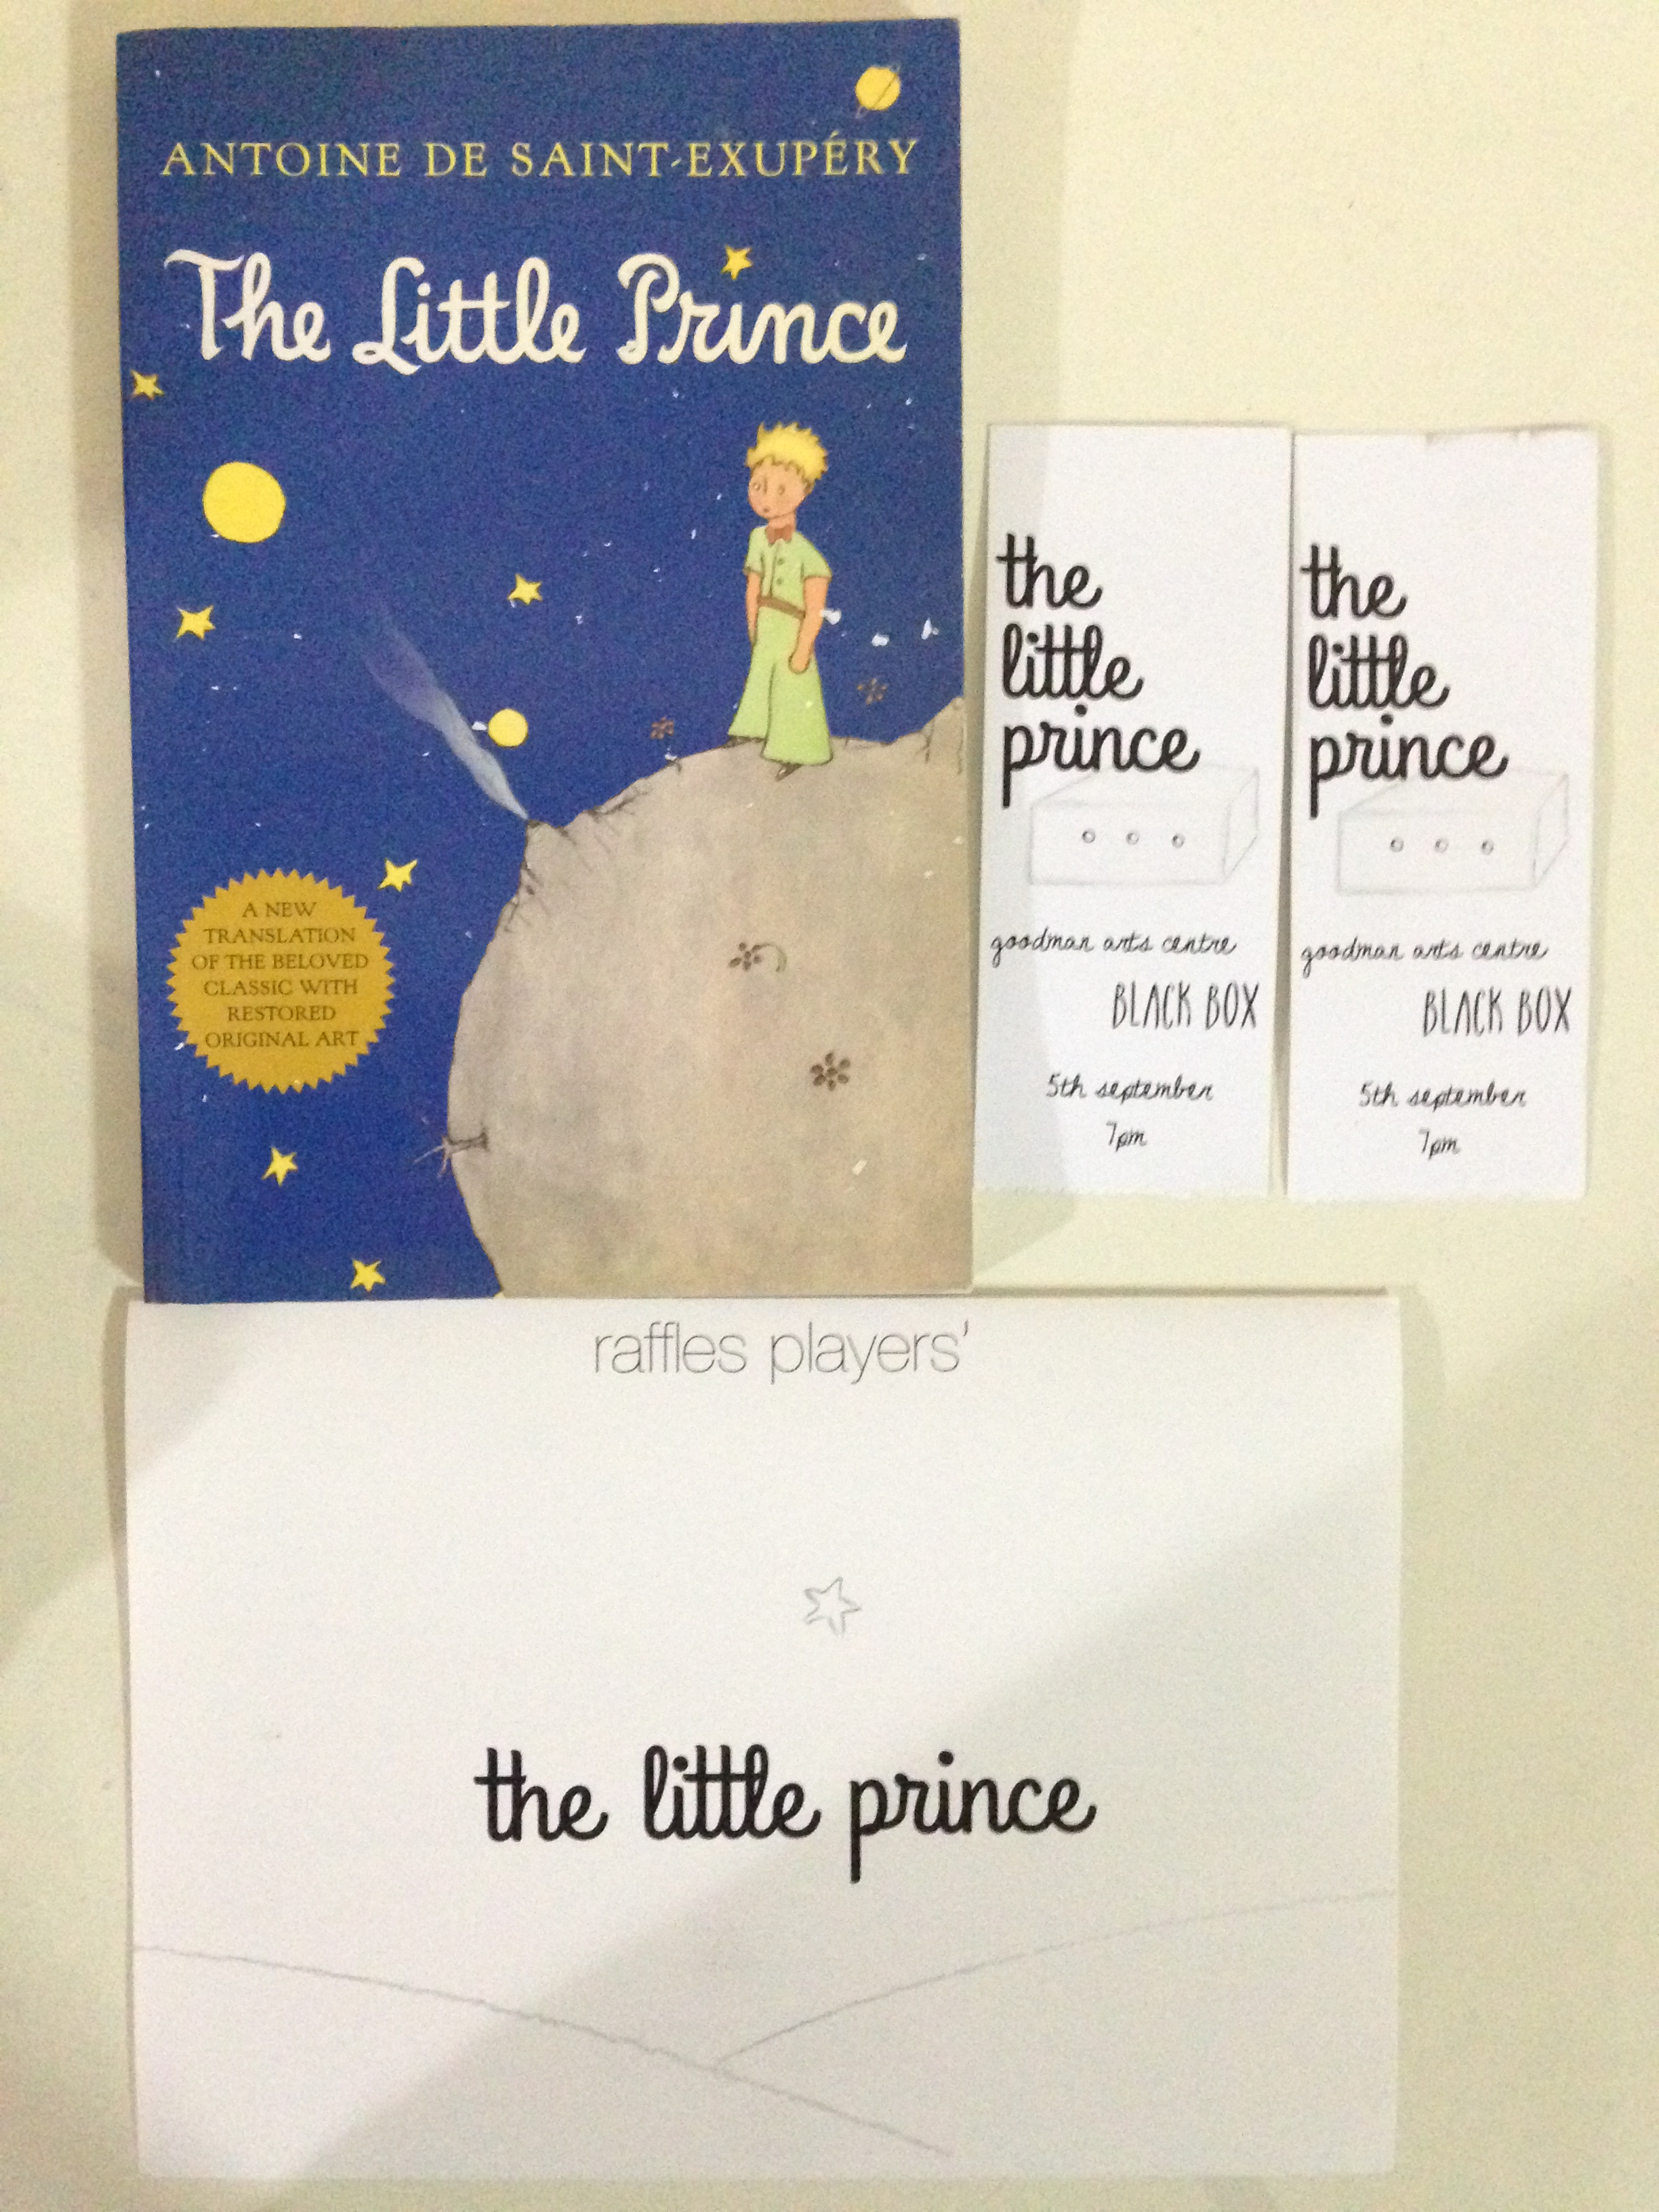 Book report on the prince